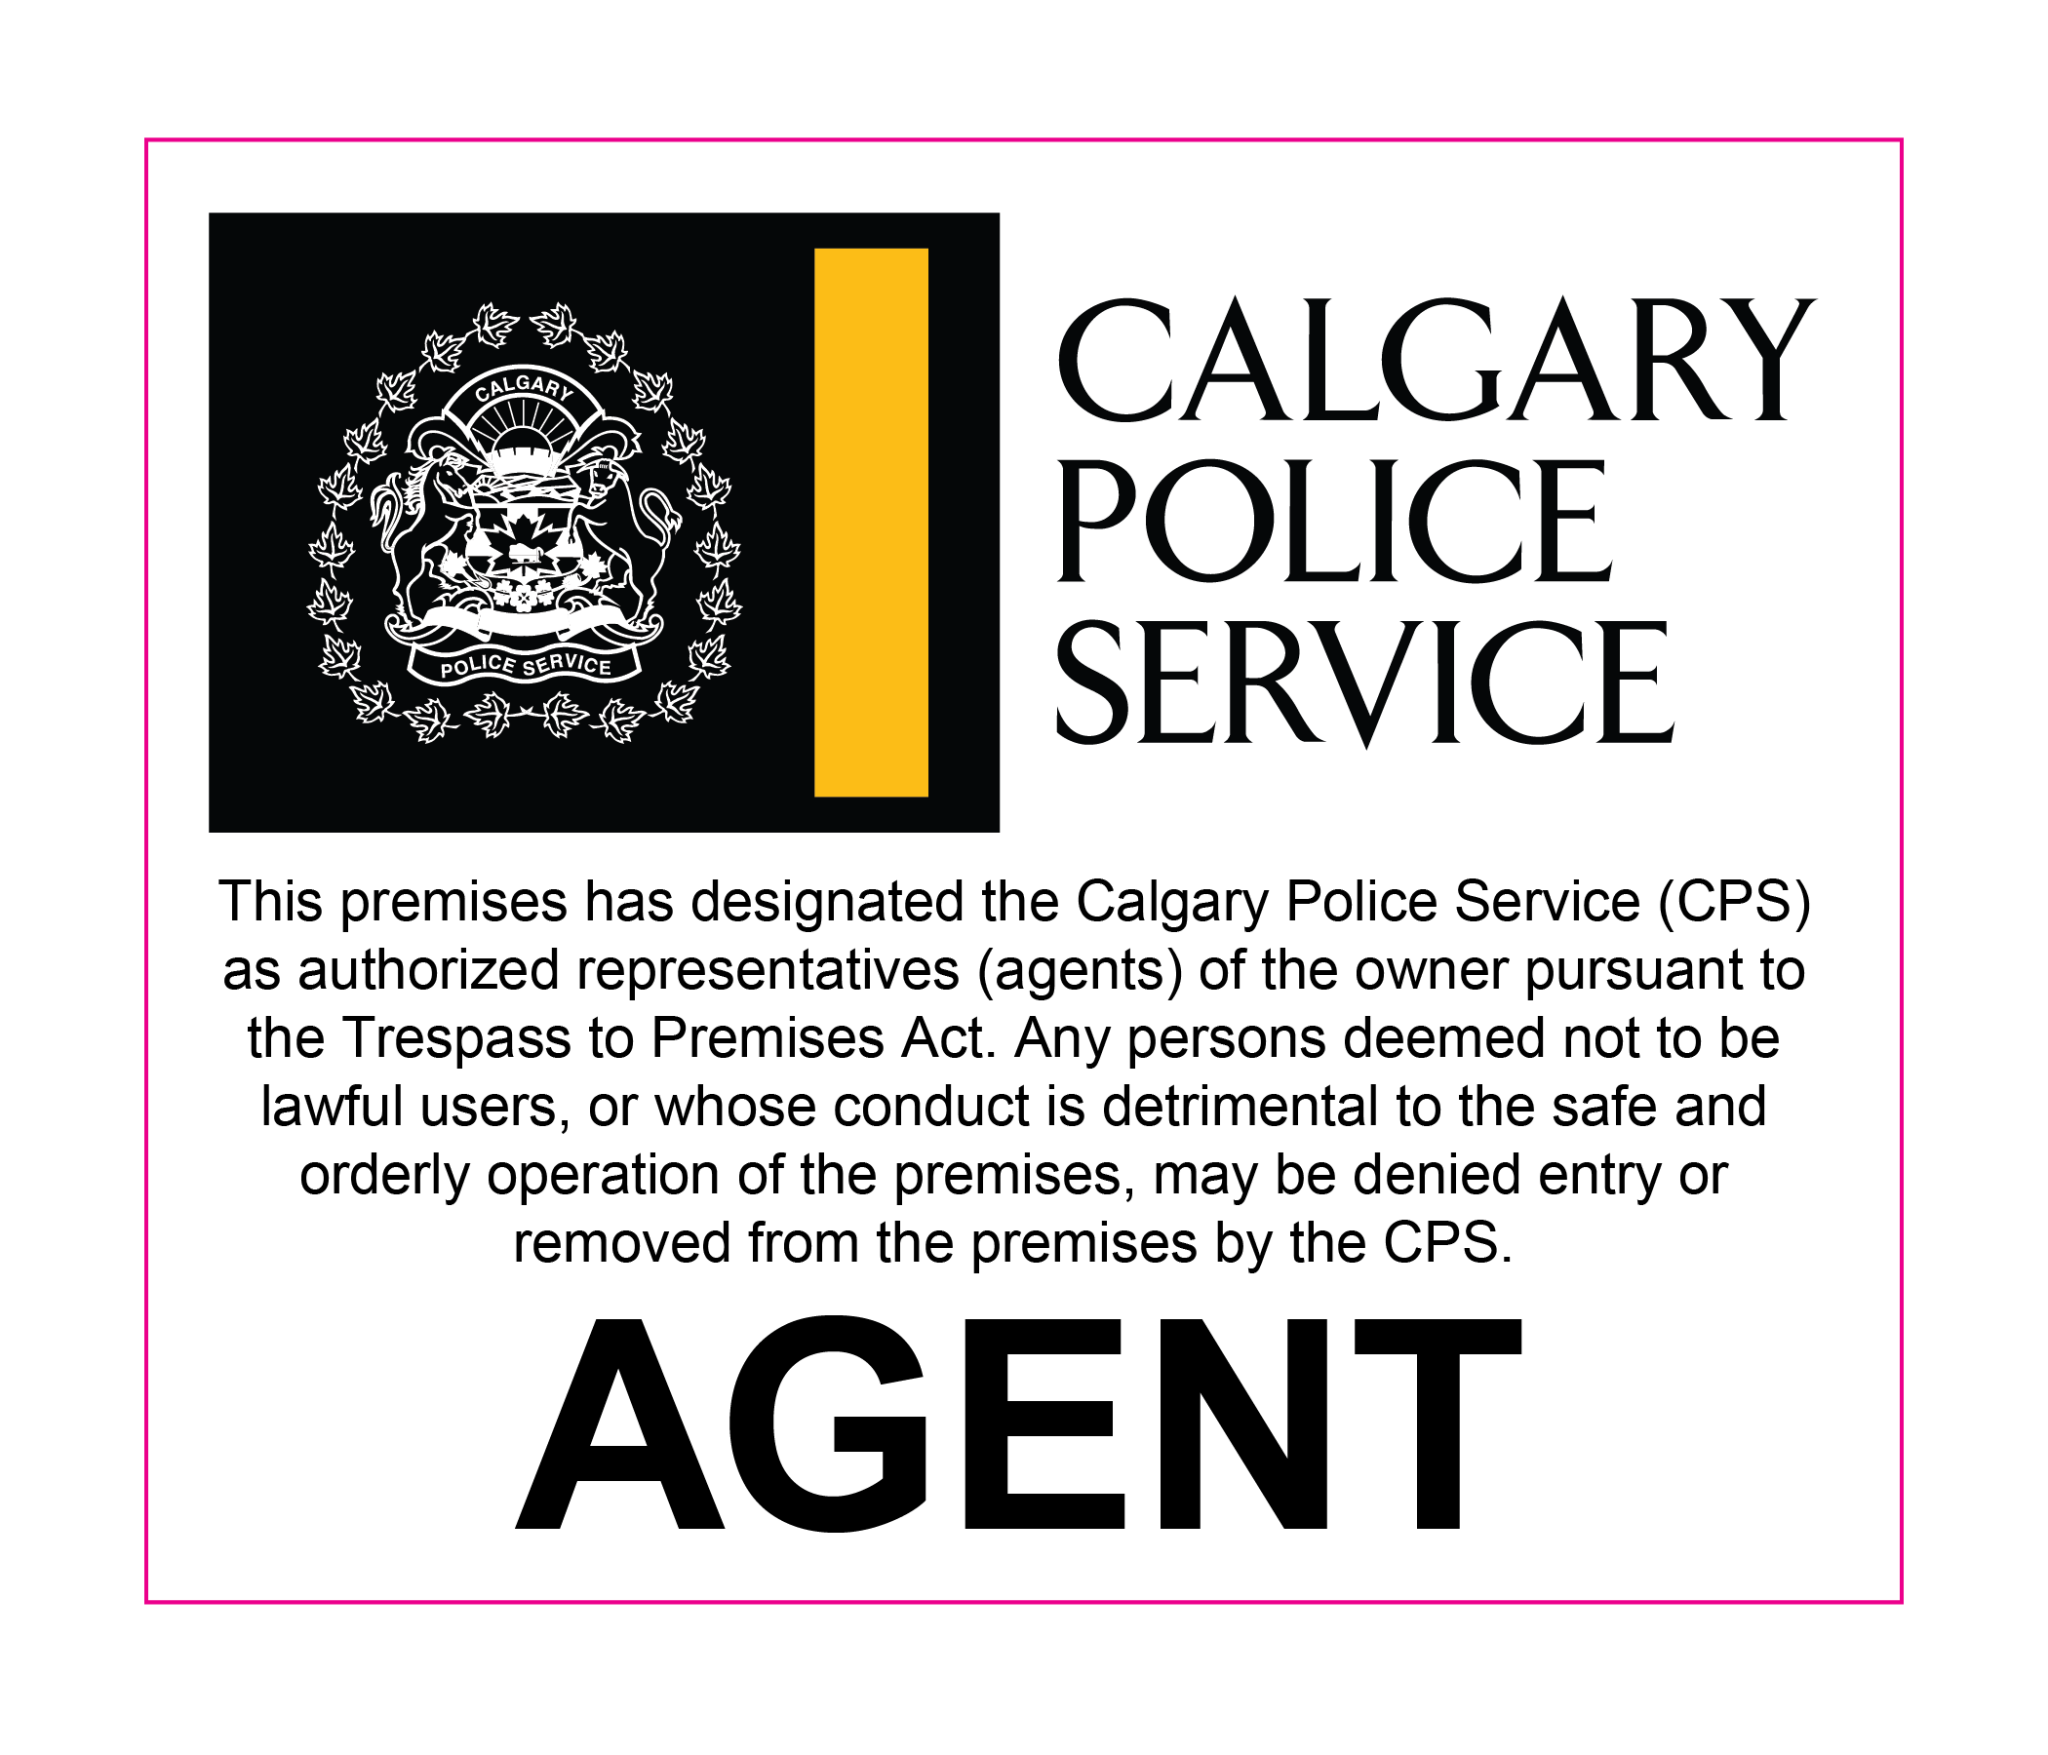 Decal for in a window that reads: This premises has designated the Calgary Police Service (CPS) as authorized representatives (agents) of the owner pursuant to the Trespass to Premises Act. Any persons deemed not to be lawful users, or whose conduct is detrimental to the safe and orderly operation of the premises, may be denied entry or  removed from the premises by the CPS. AGENT.